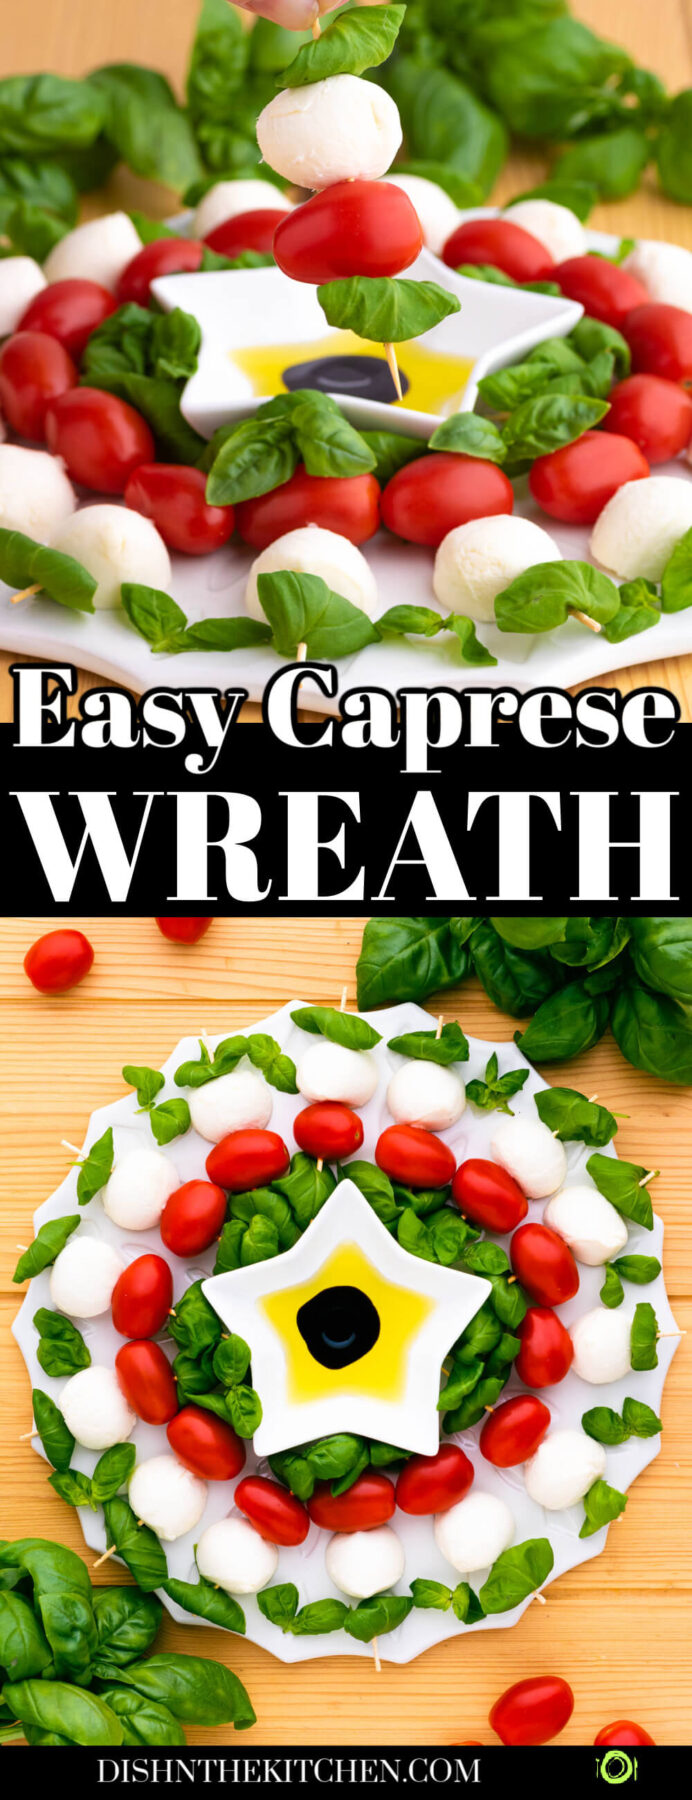 Pinterest image featuring a caprese appetizer wreath with caprese salad ingredients on wooden skewers.